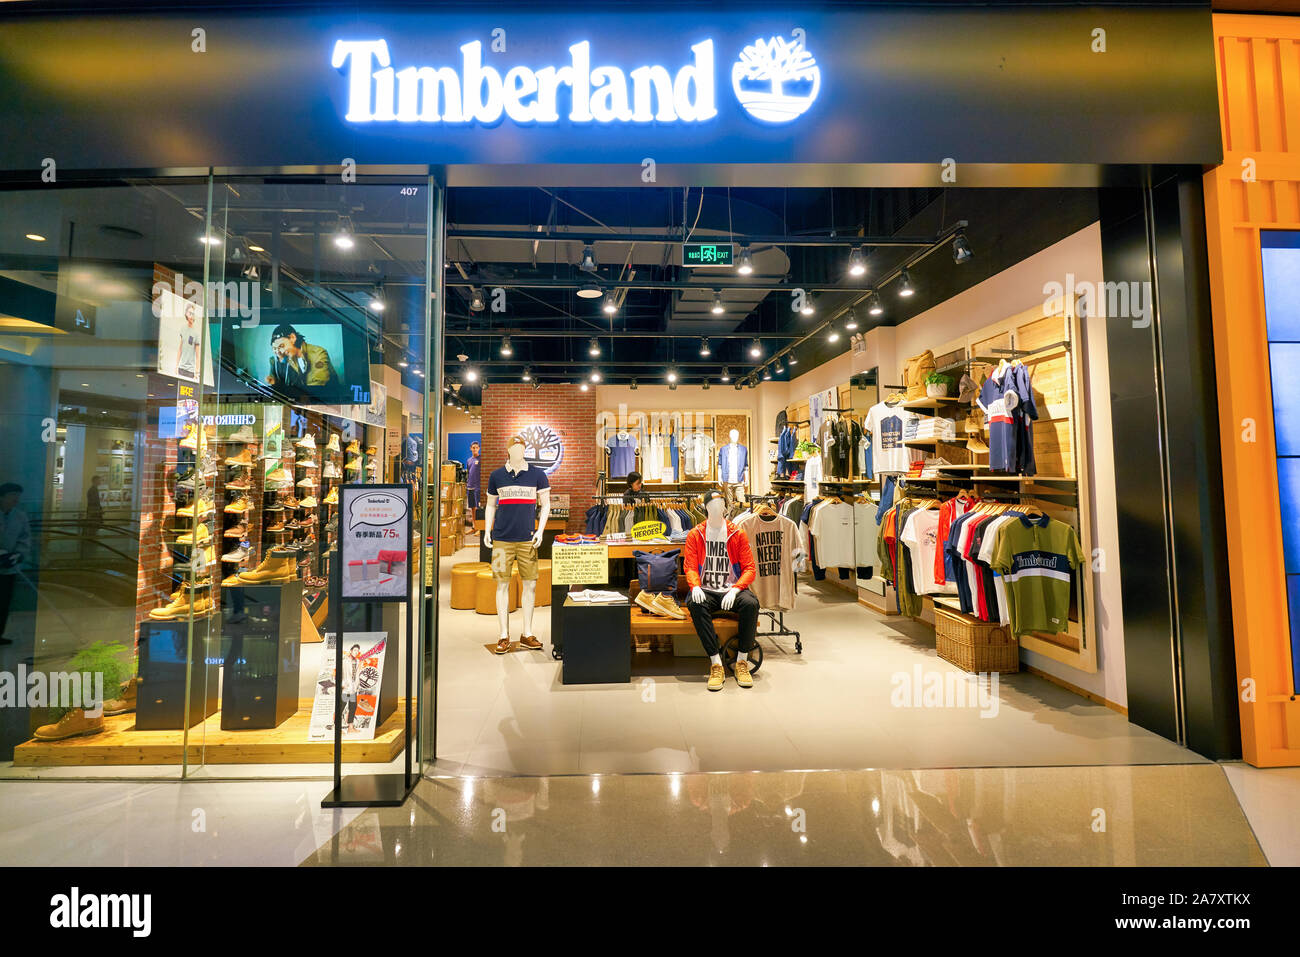 timberland outlet egypt